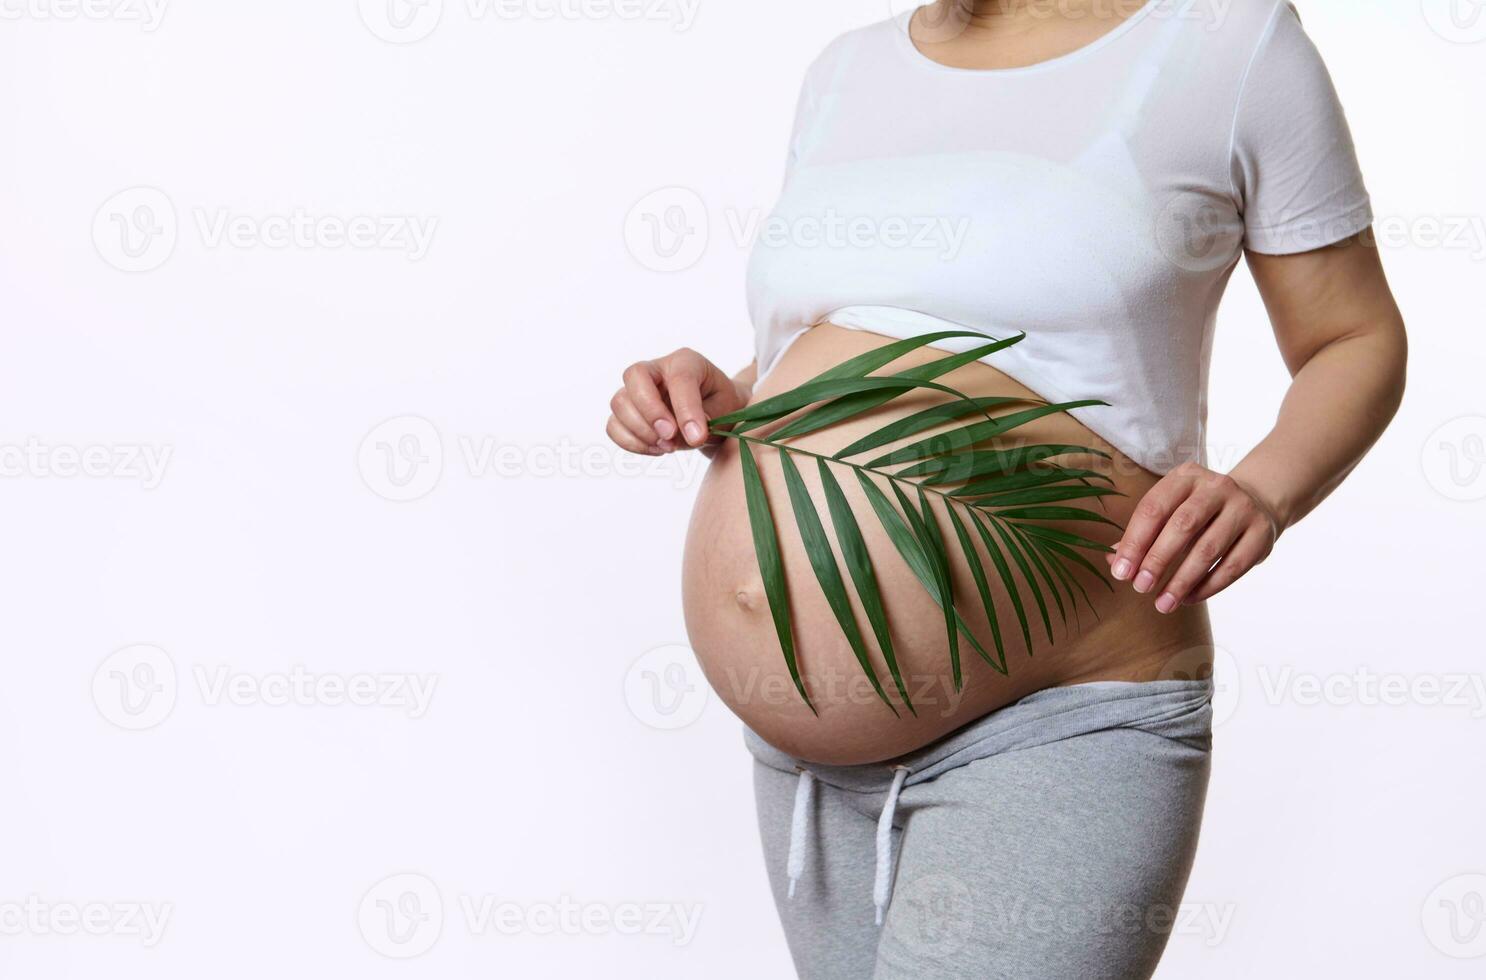 Close-up pregnant woman with naked belly, expecting baby, holding palm leaf on her belly in pregnancy trimester third. photo